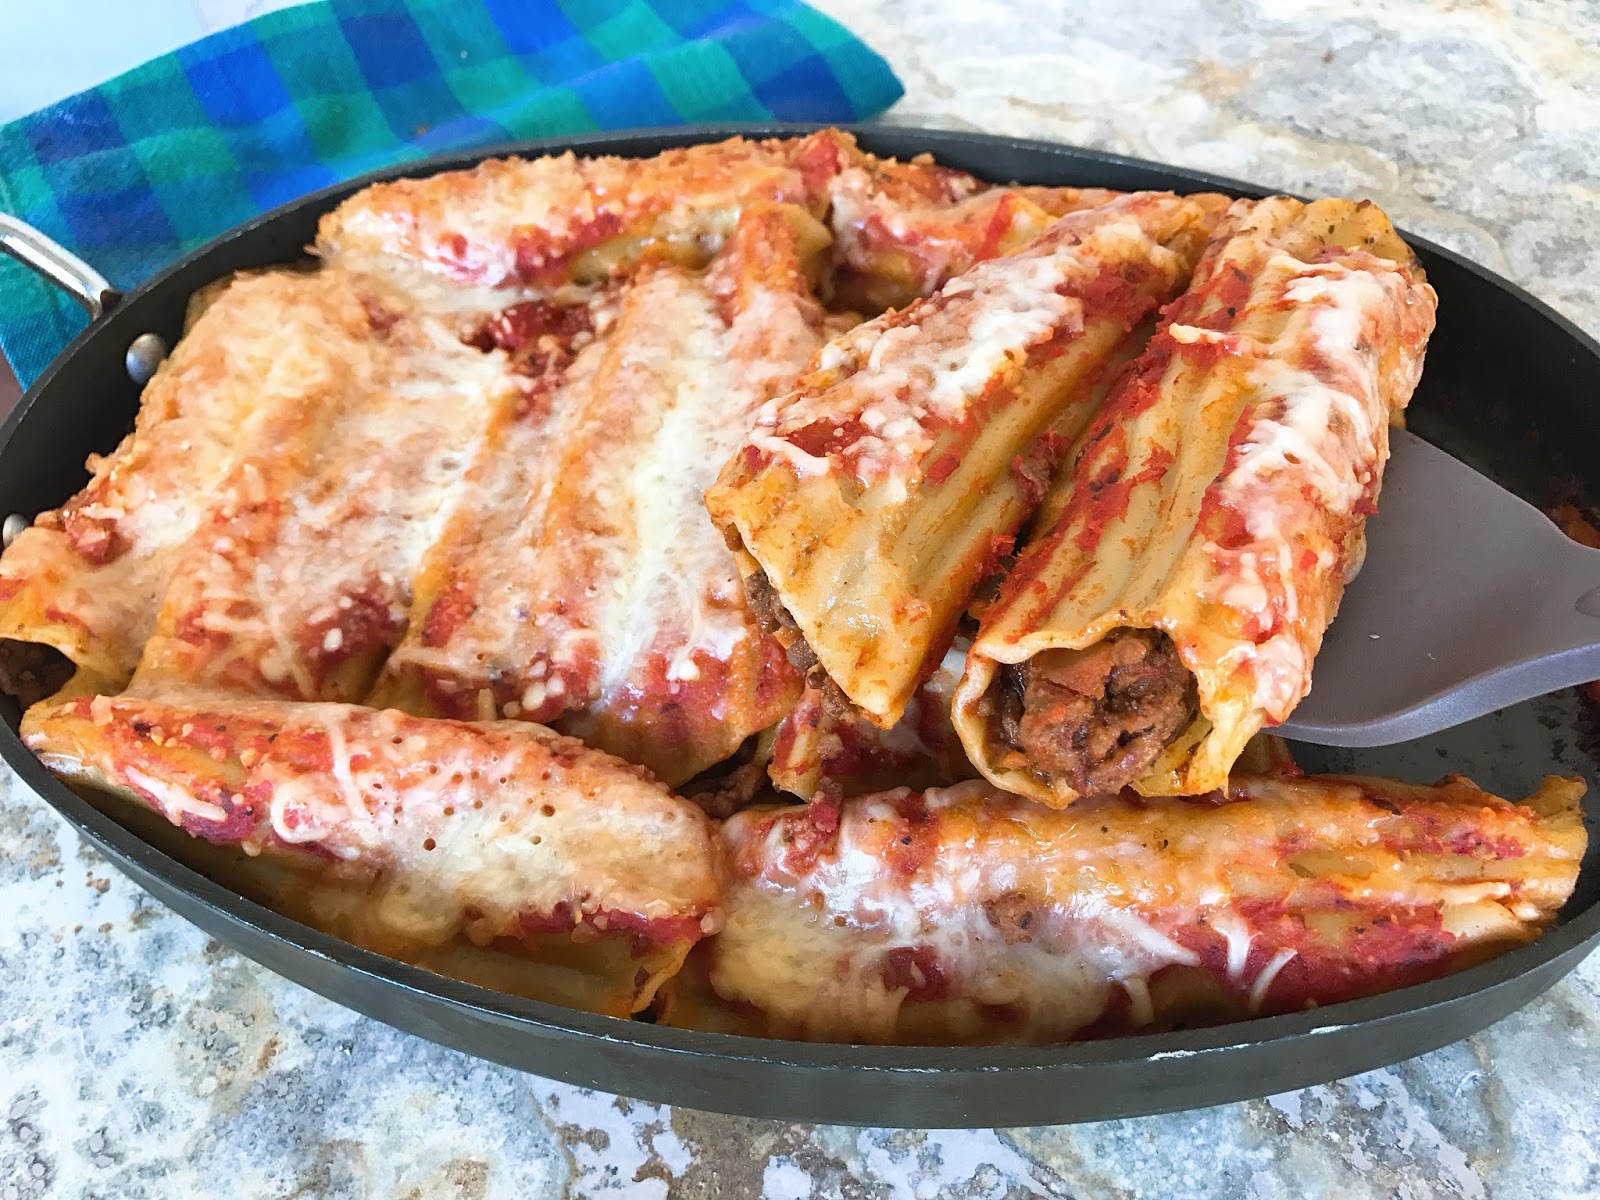 To Nine Morning The appliance Baked Manicotti with Beef, Spinach and Cheese